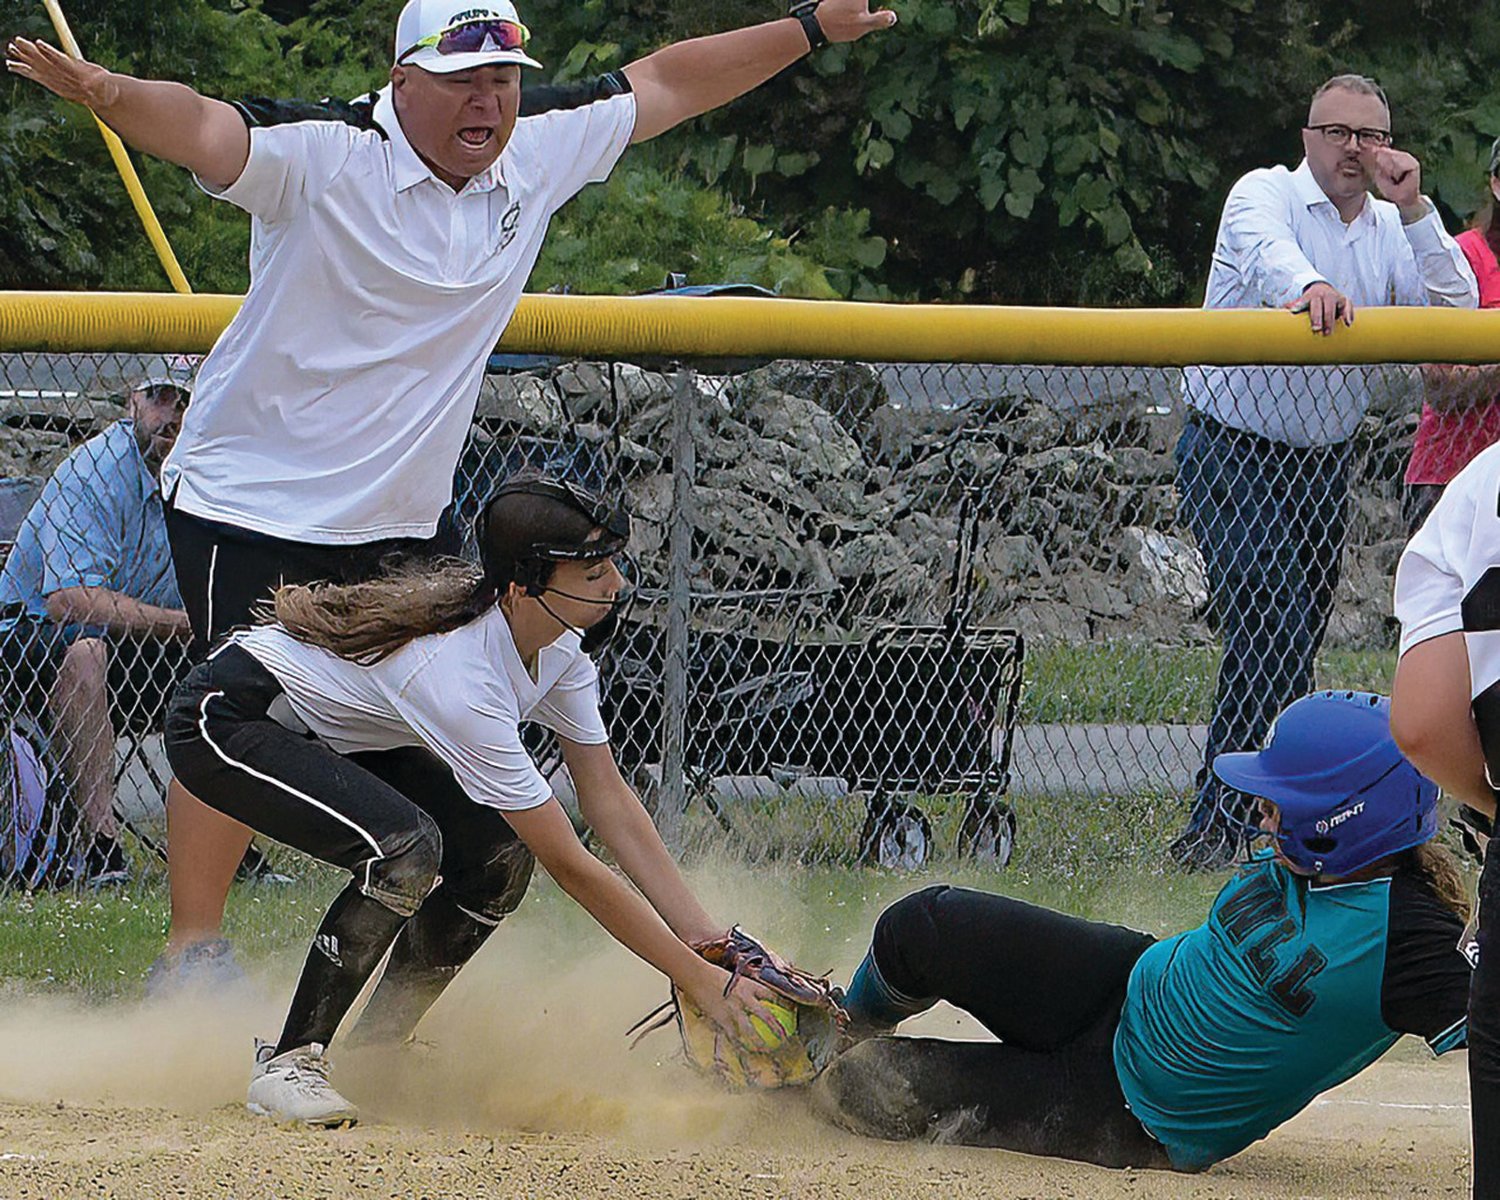 THE TAG: Aniyah Neves looks to tag a runner out at third.